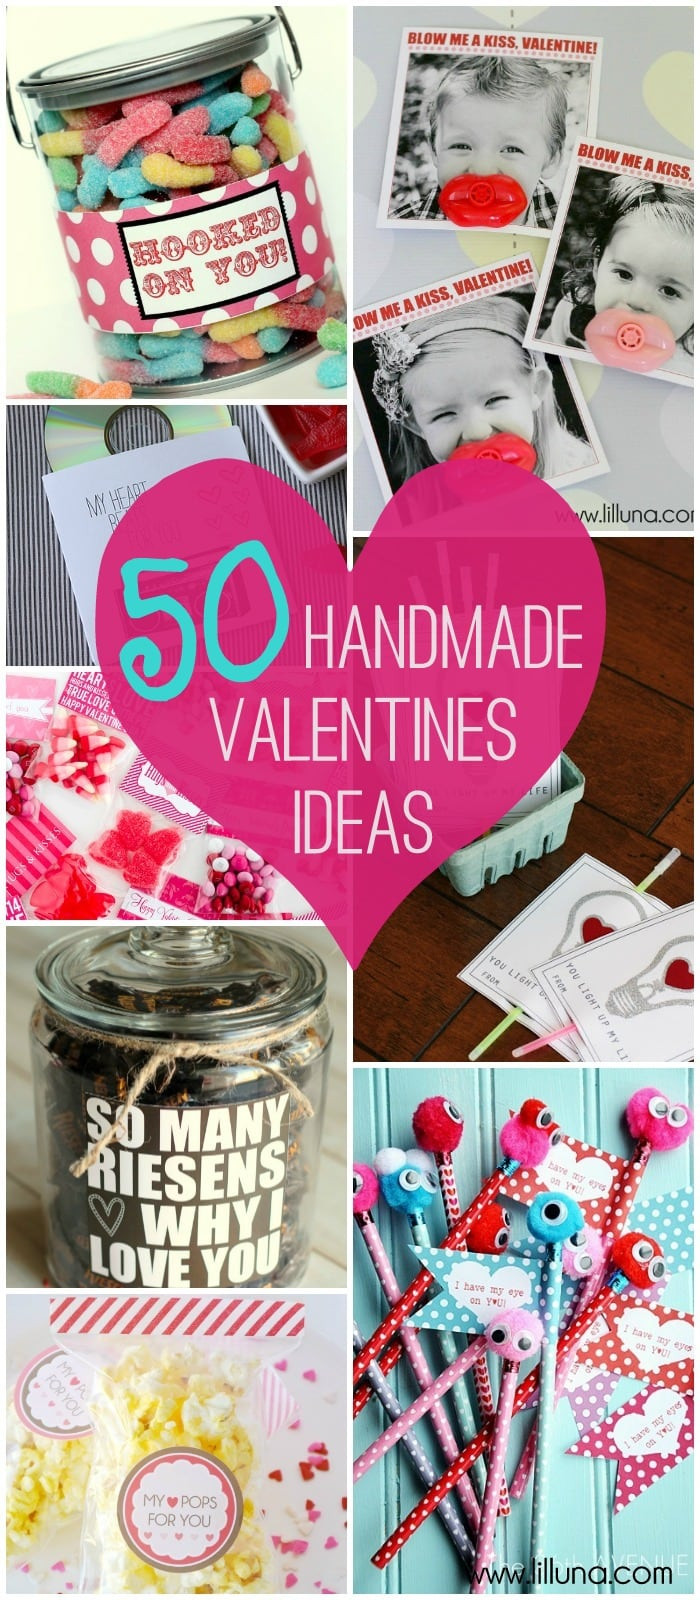 Good Valentines Gift Ideas
 14 Gifts of Valentines with Free Printables plus MORE